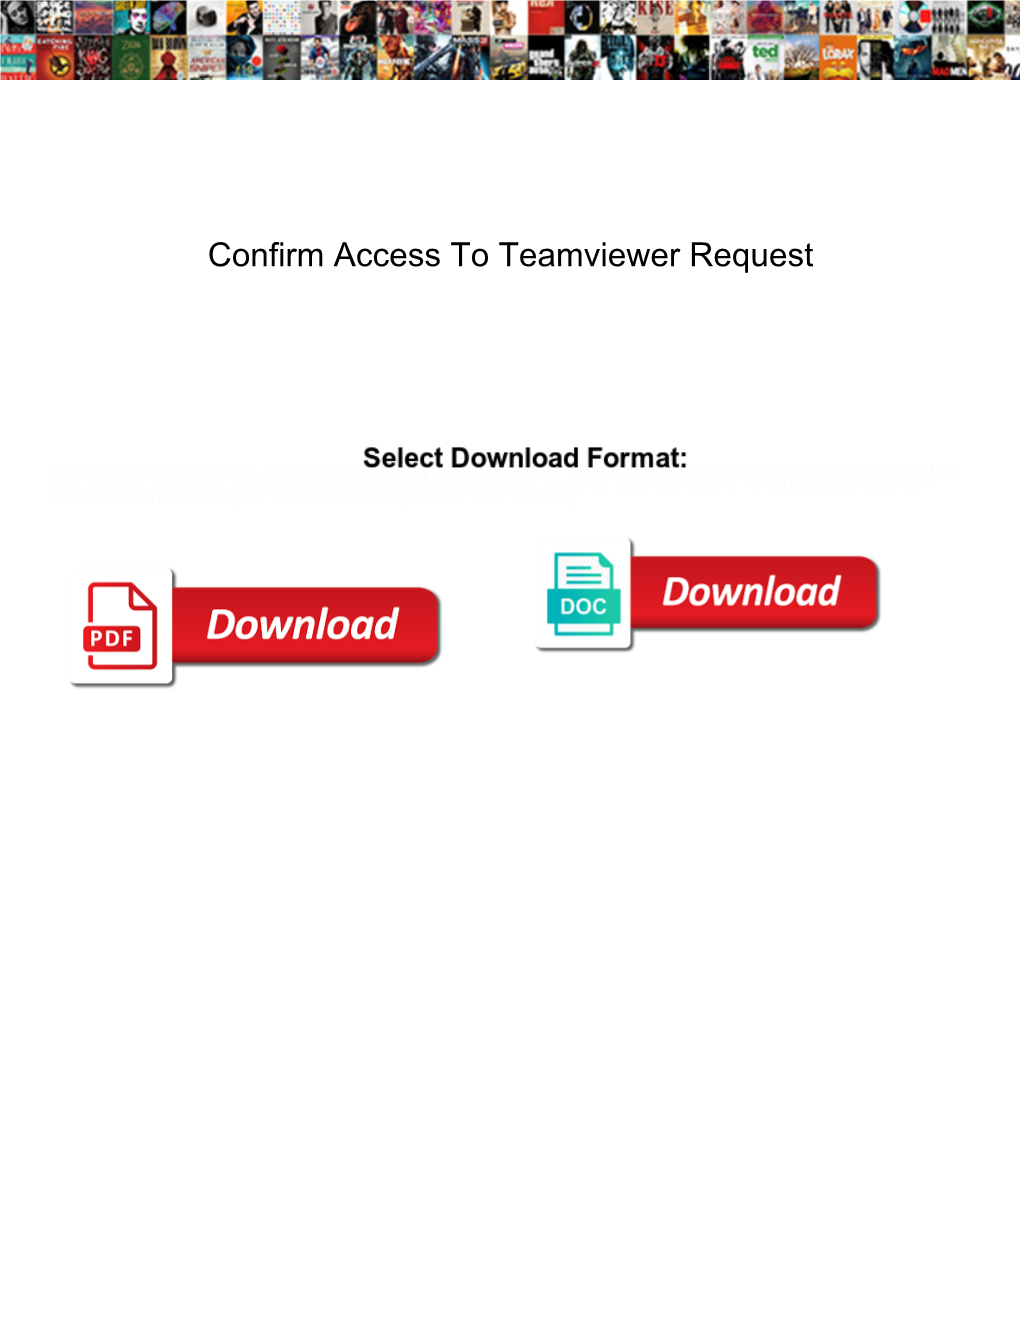 Confirm Access to Teamviewer Request